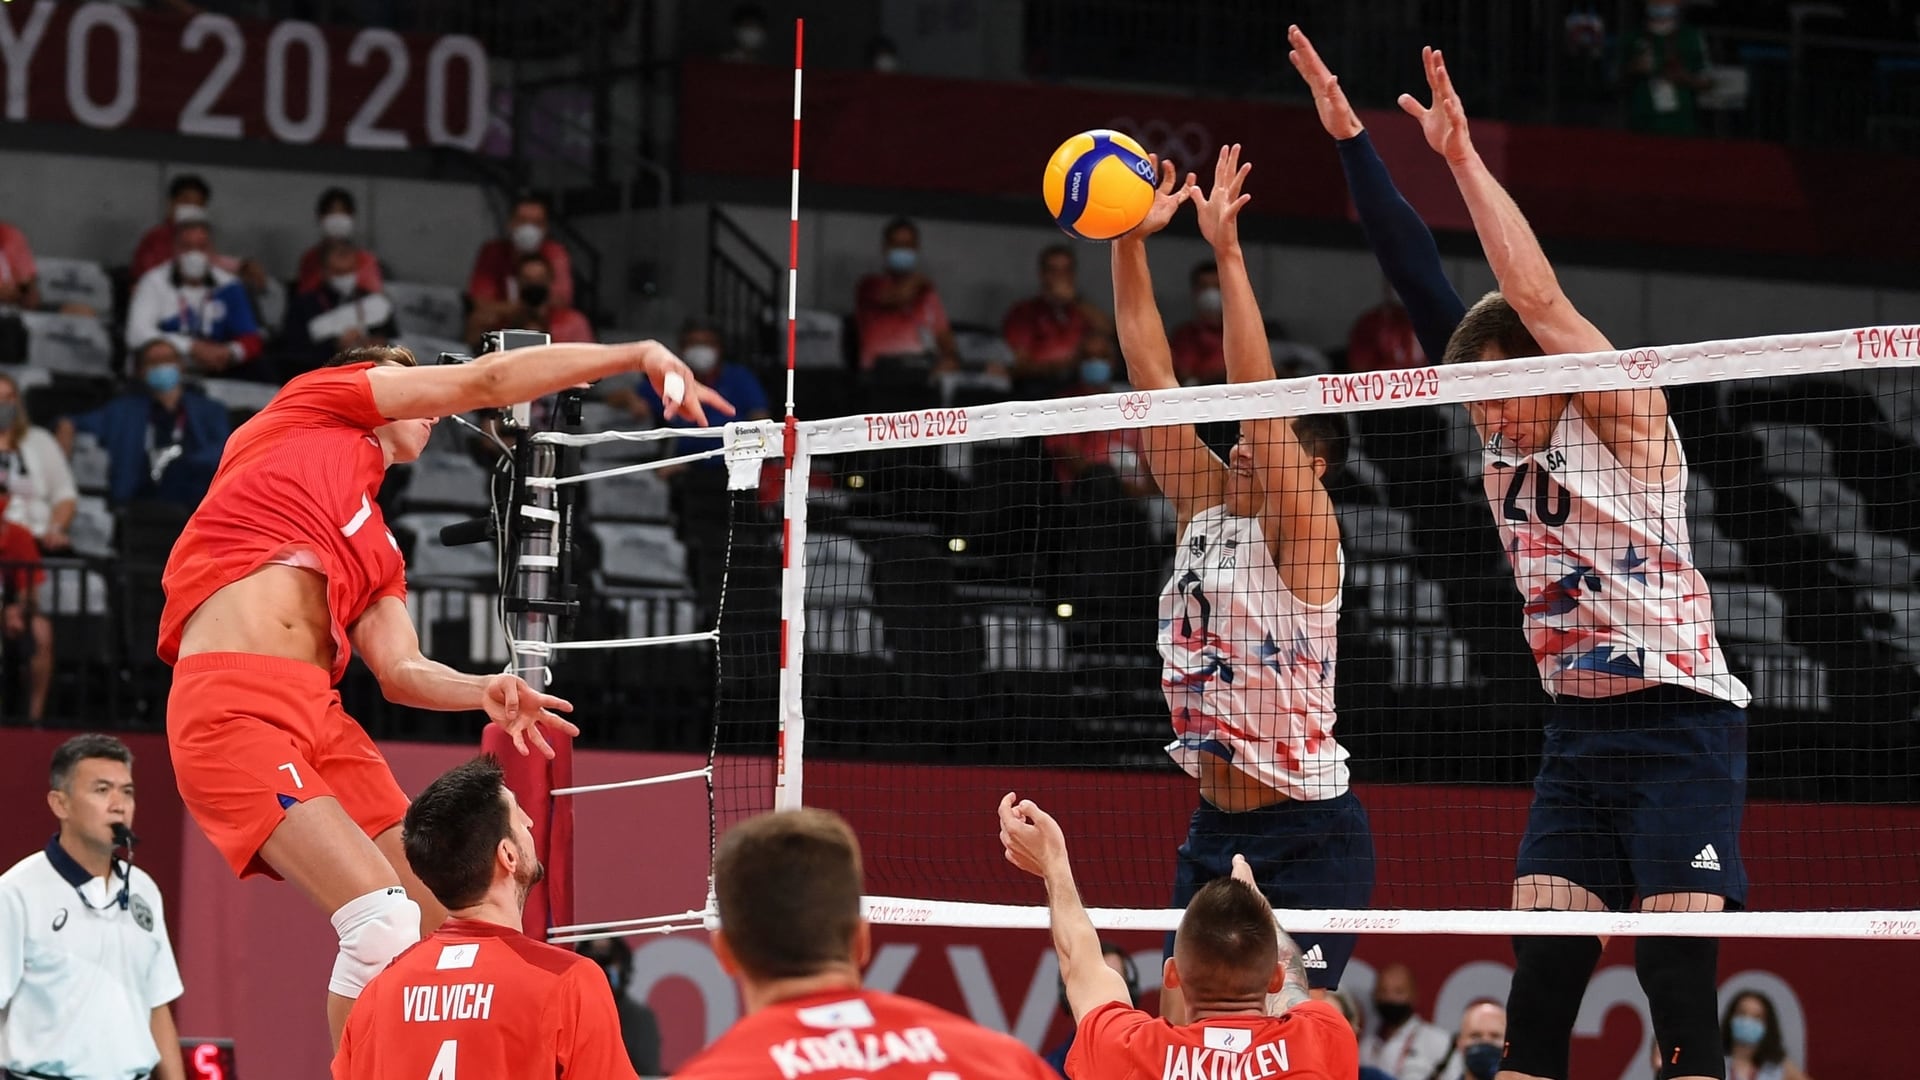 Men's Volleyball: Team USA Comeback Bid Stopped by ROC